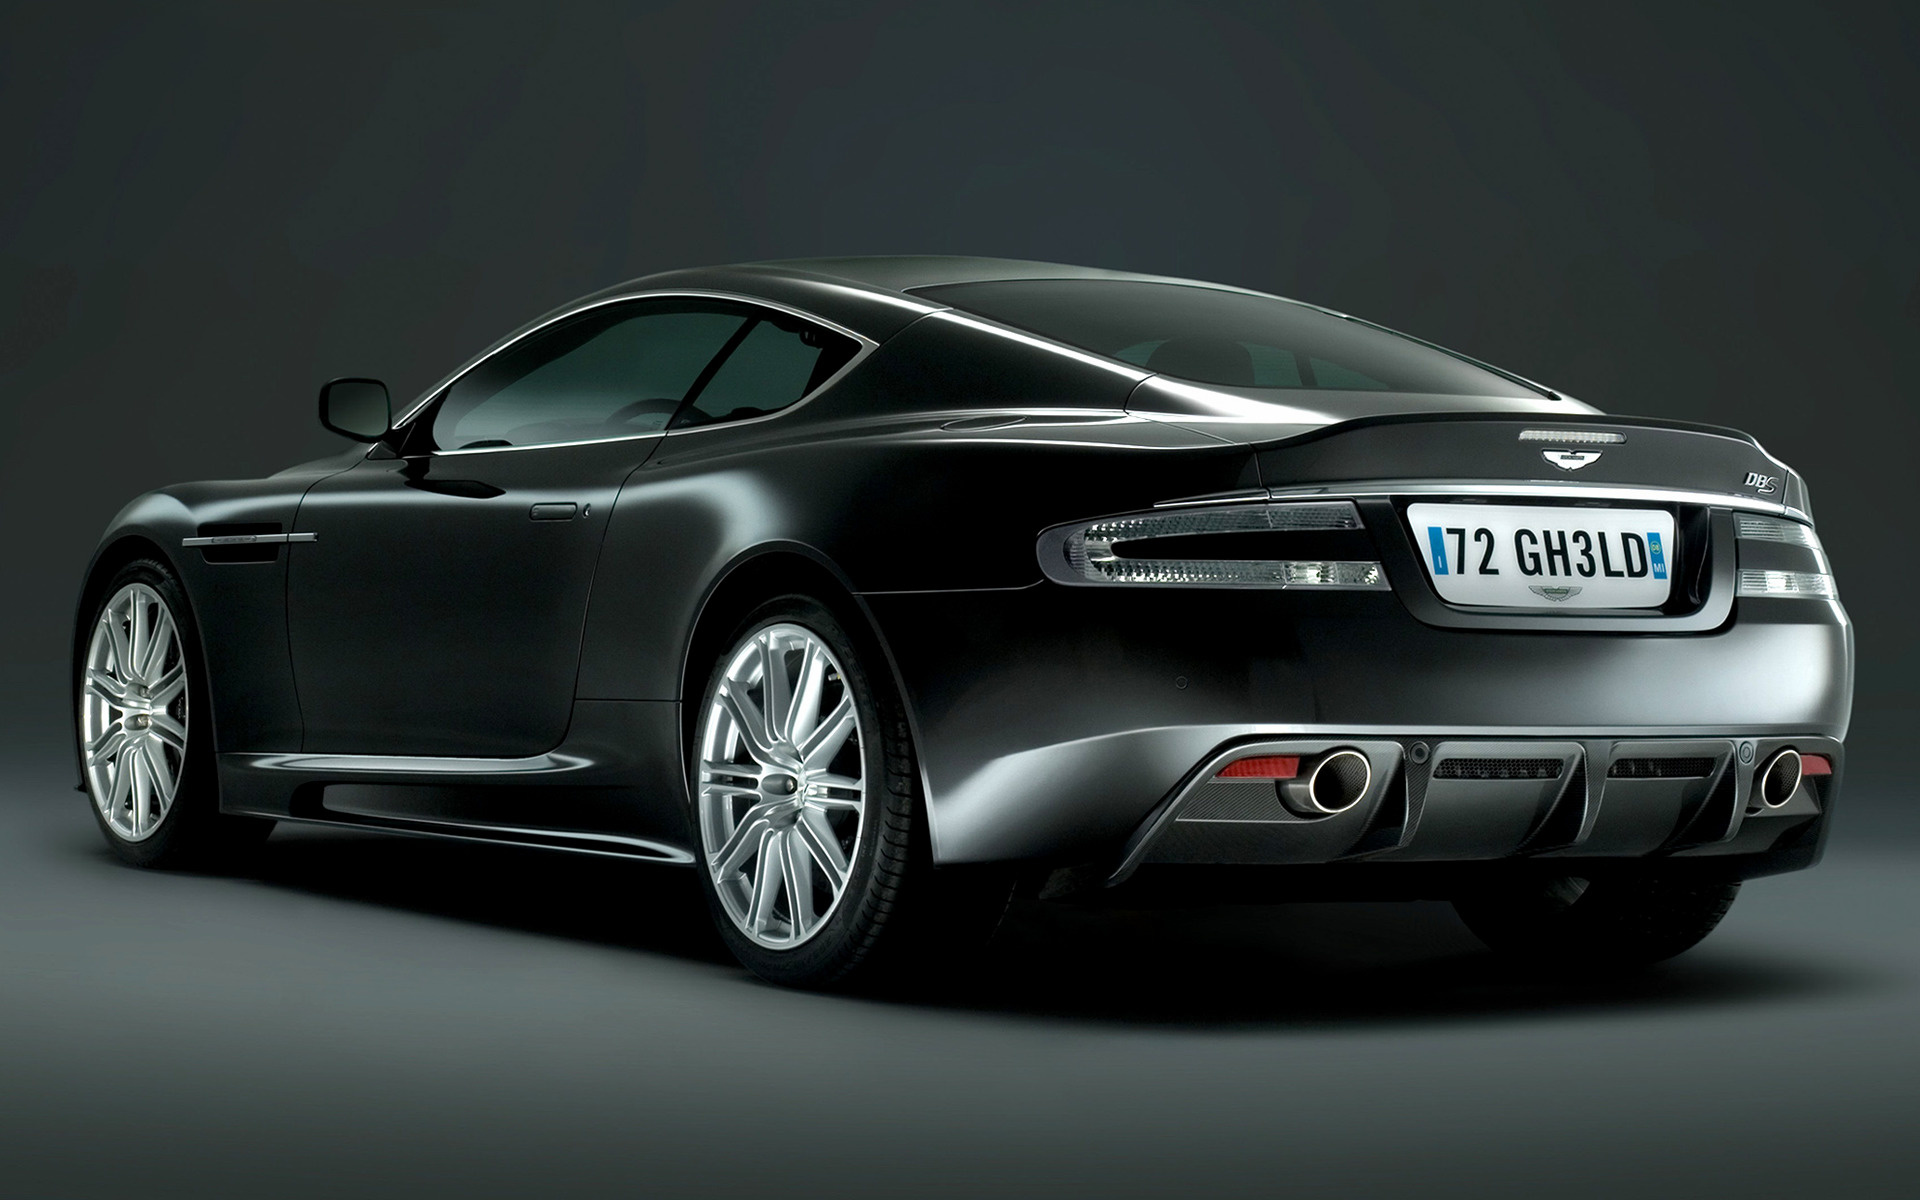 2008 Aston Martin DBS 007 Quantum of Solace - Wallpapers and HD Images